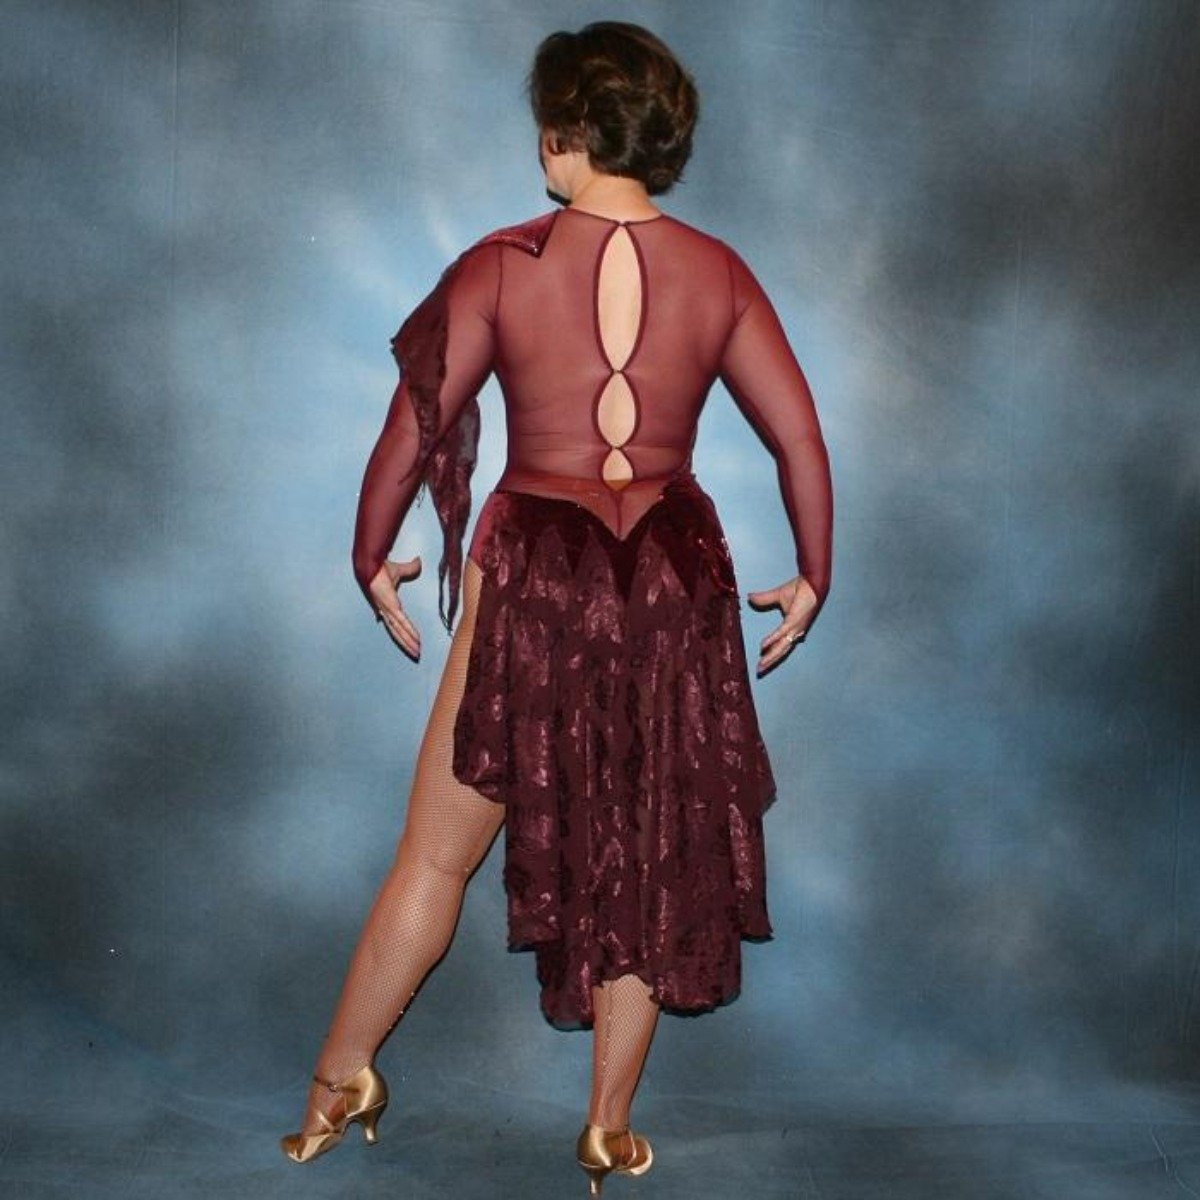 Crystal's Creations back view of Burgundy stretch velvet Latin/rhythm dress created on burgundy stretch mesh base with rose patterned clip/cut chiffon, is embellished with burgundy, fuchsia, antique rose, & orchid Swarovski rhinestone work & a touch of Swarovski hand beading.